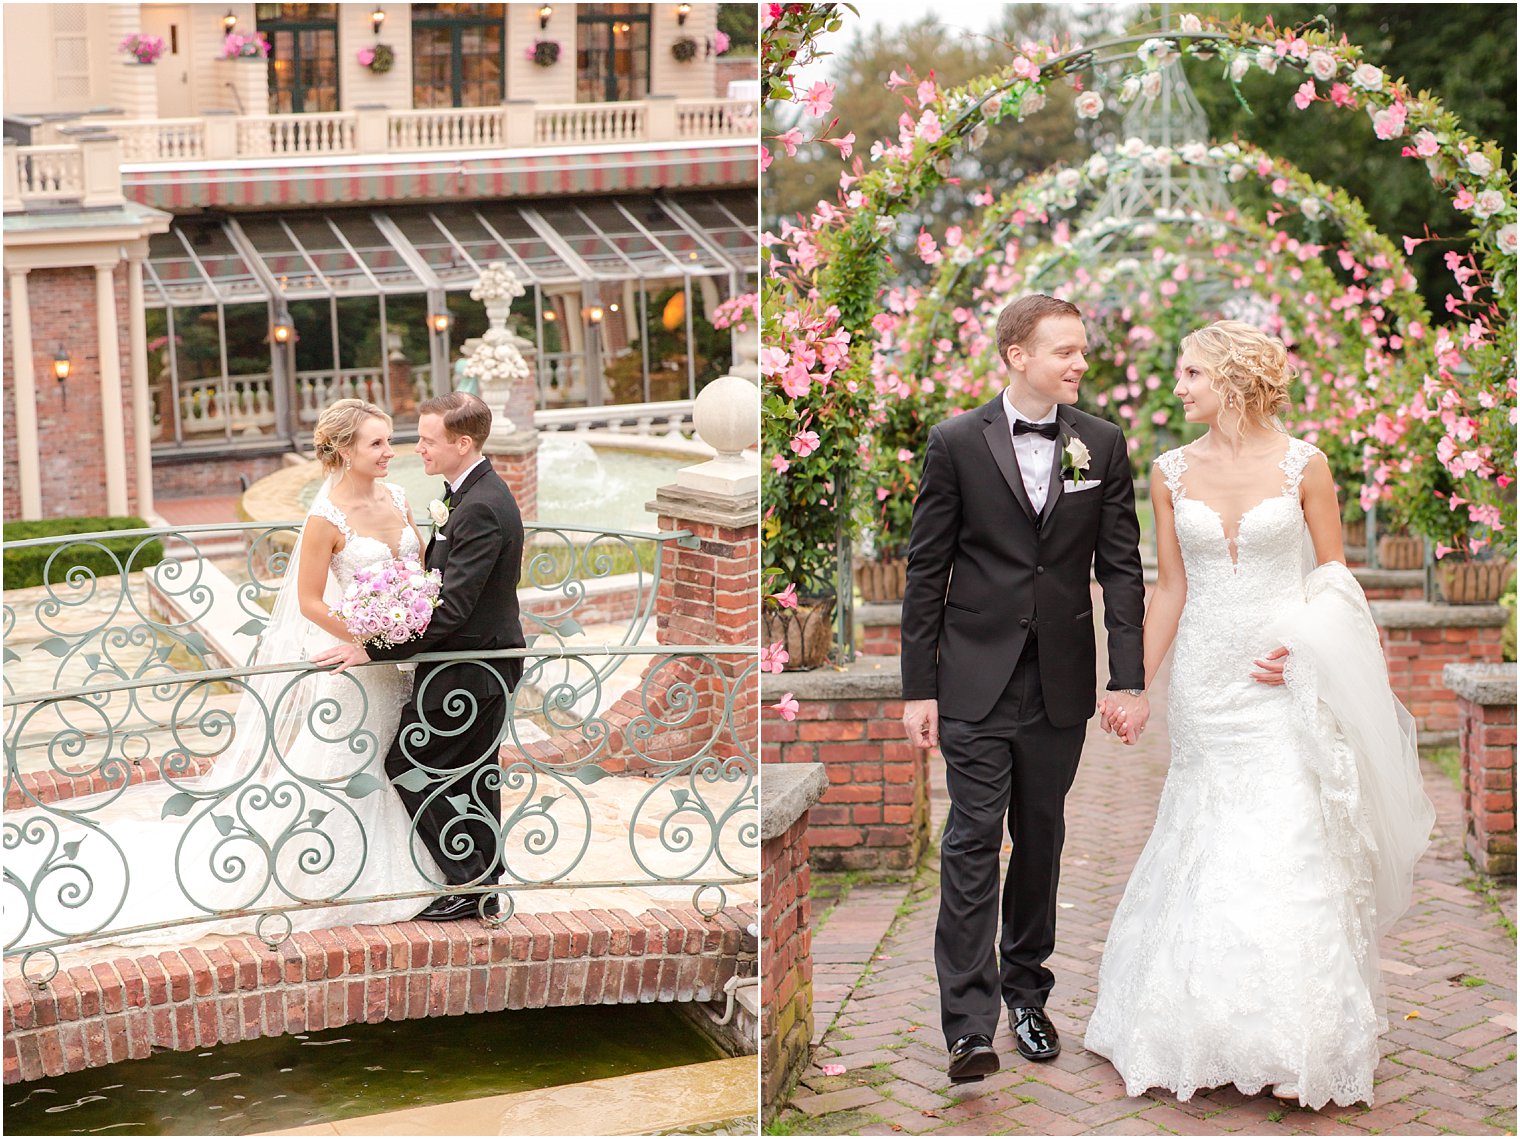 Bride and groom photos at The Manor | West Manor, NJ Wedding Photographer